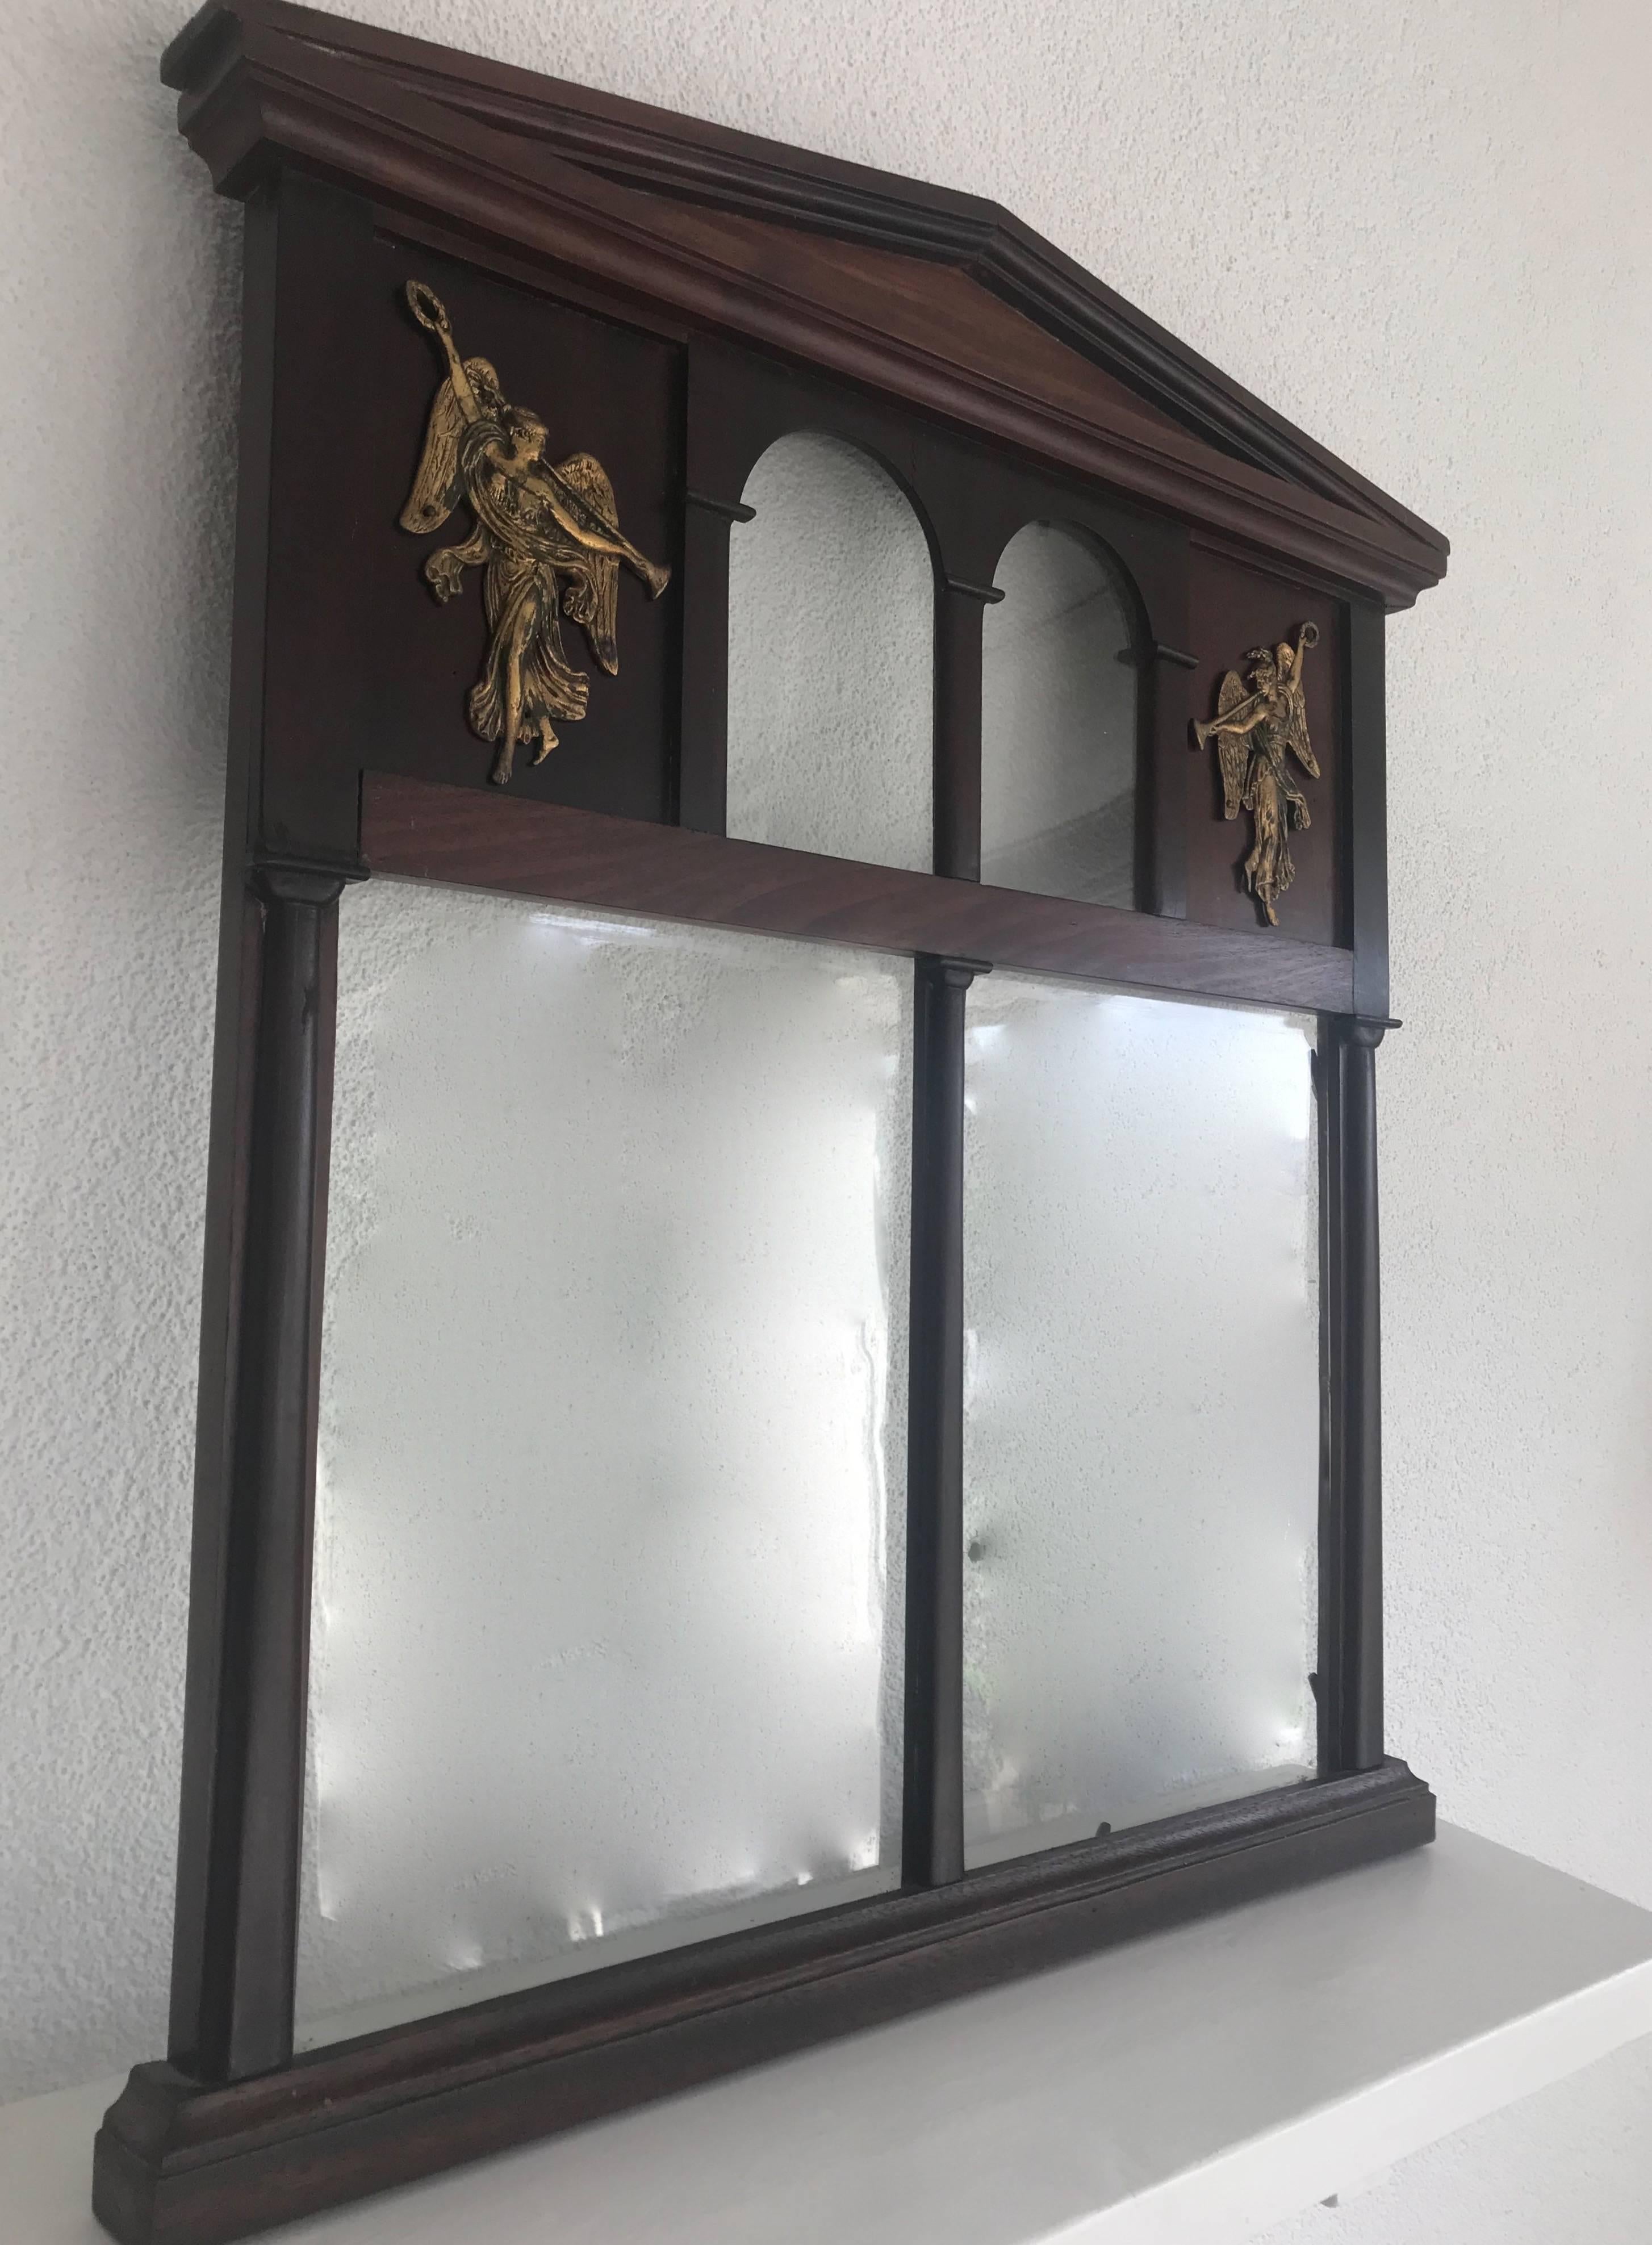 Rare and beautifully crafted patinated nutwood picture frame or mirror with original glass panels.

There is something about antique home accessories that cannot be found in modern ones. It most often is the quality of the materials combined with